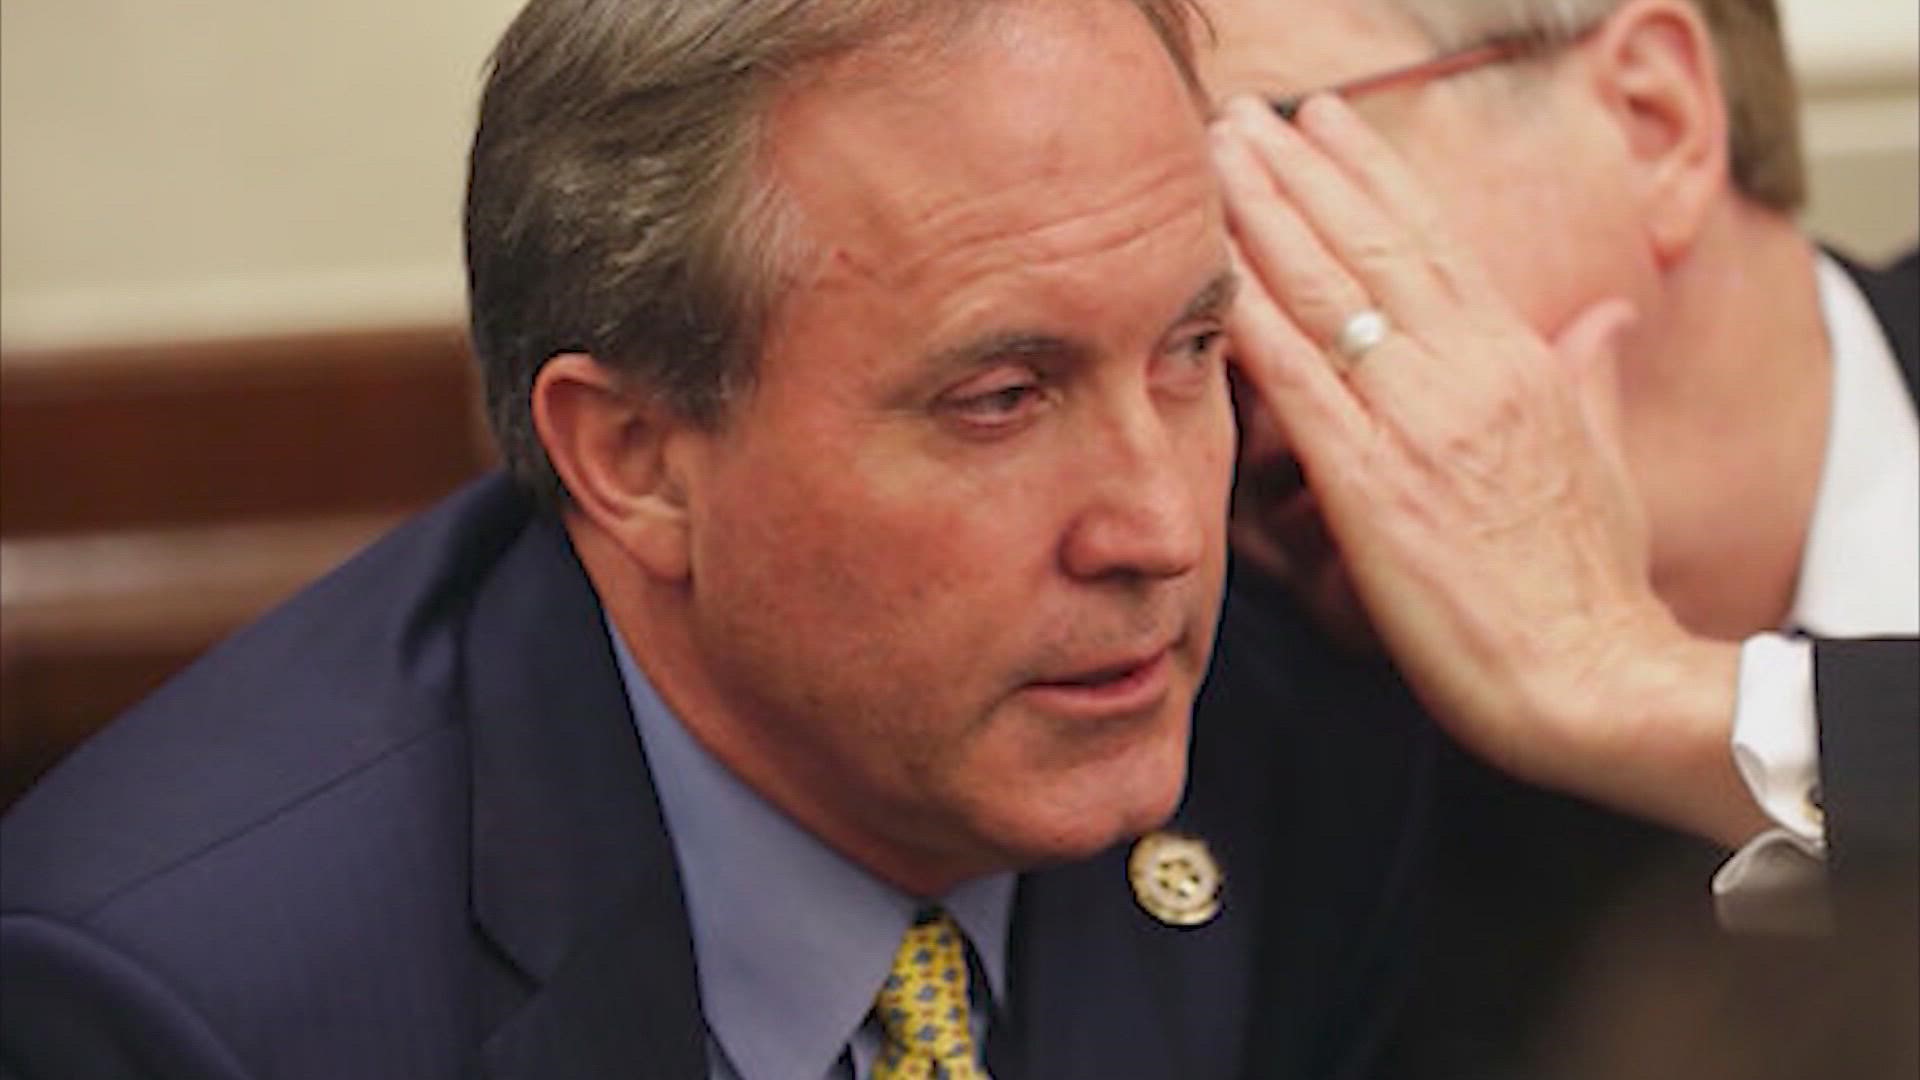 In an affidavit, a process server said Ken Paxton tried evading him as he attempted to deliver a subpoena from an abortion fund’s lawsuit.